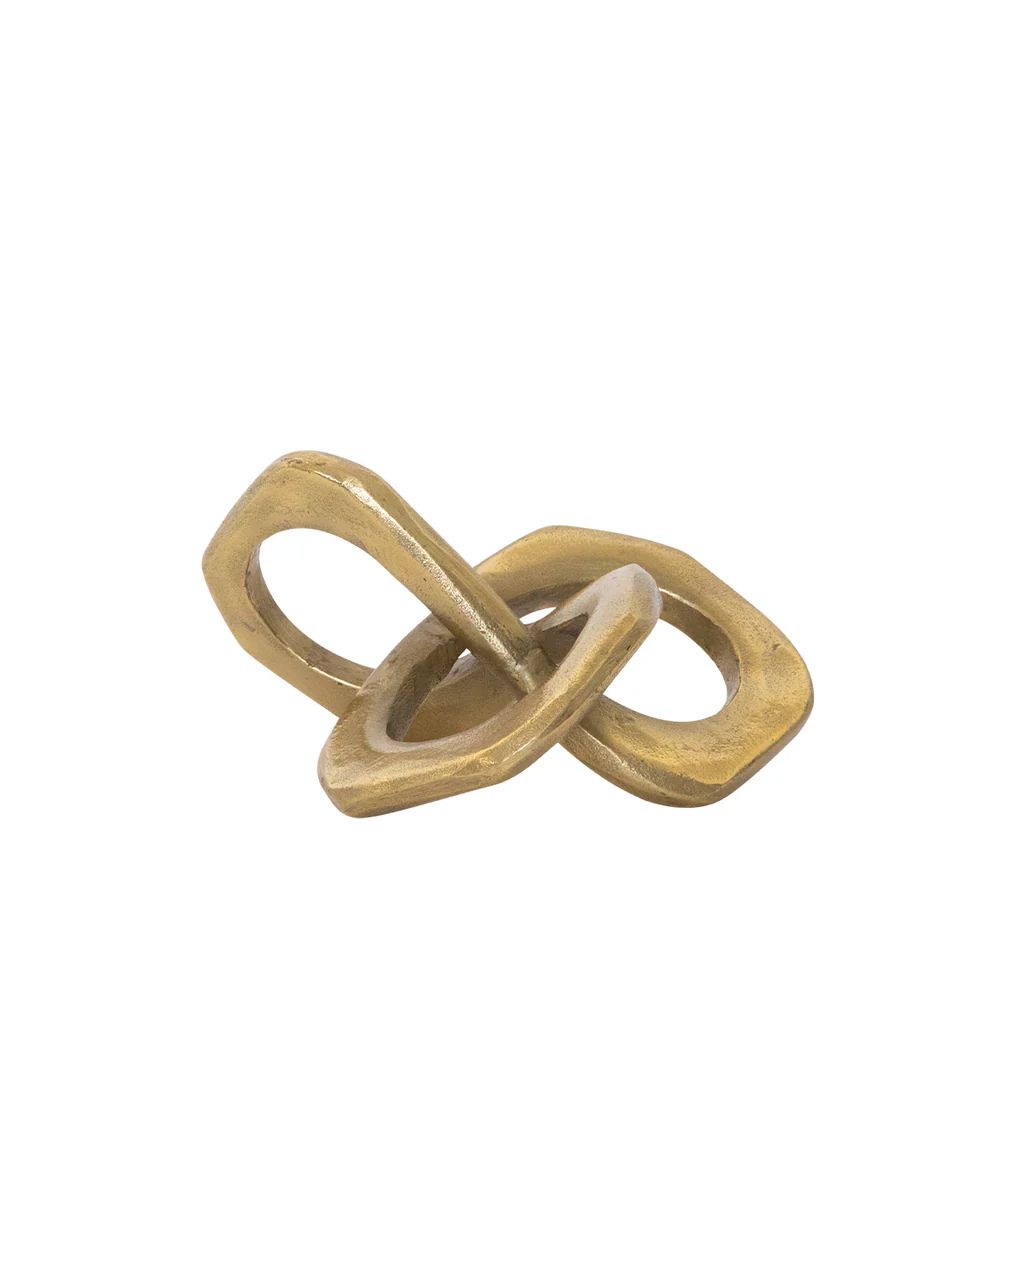 Gilded Knot Object | McGee & Co.